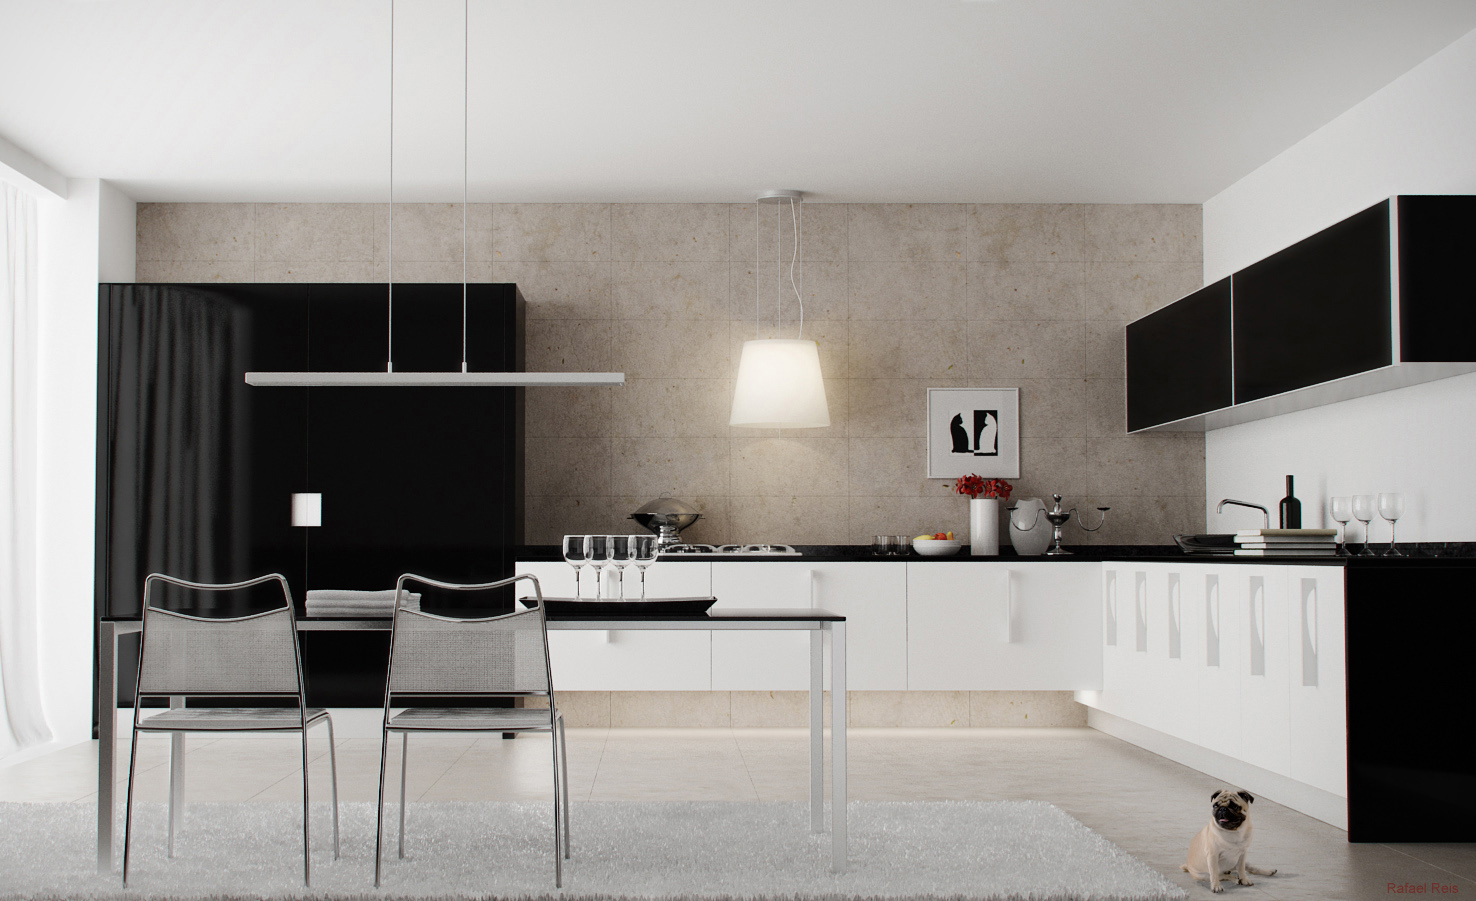 minimalist kitchen design with dining table and black white color themes decor